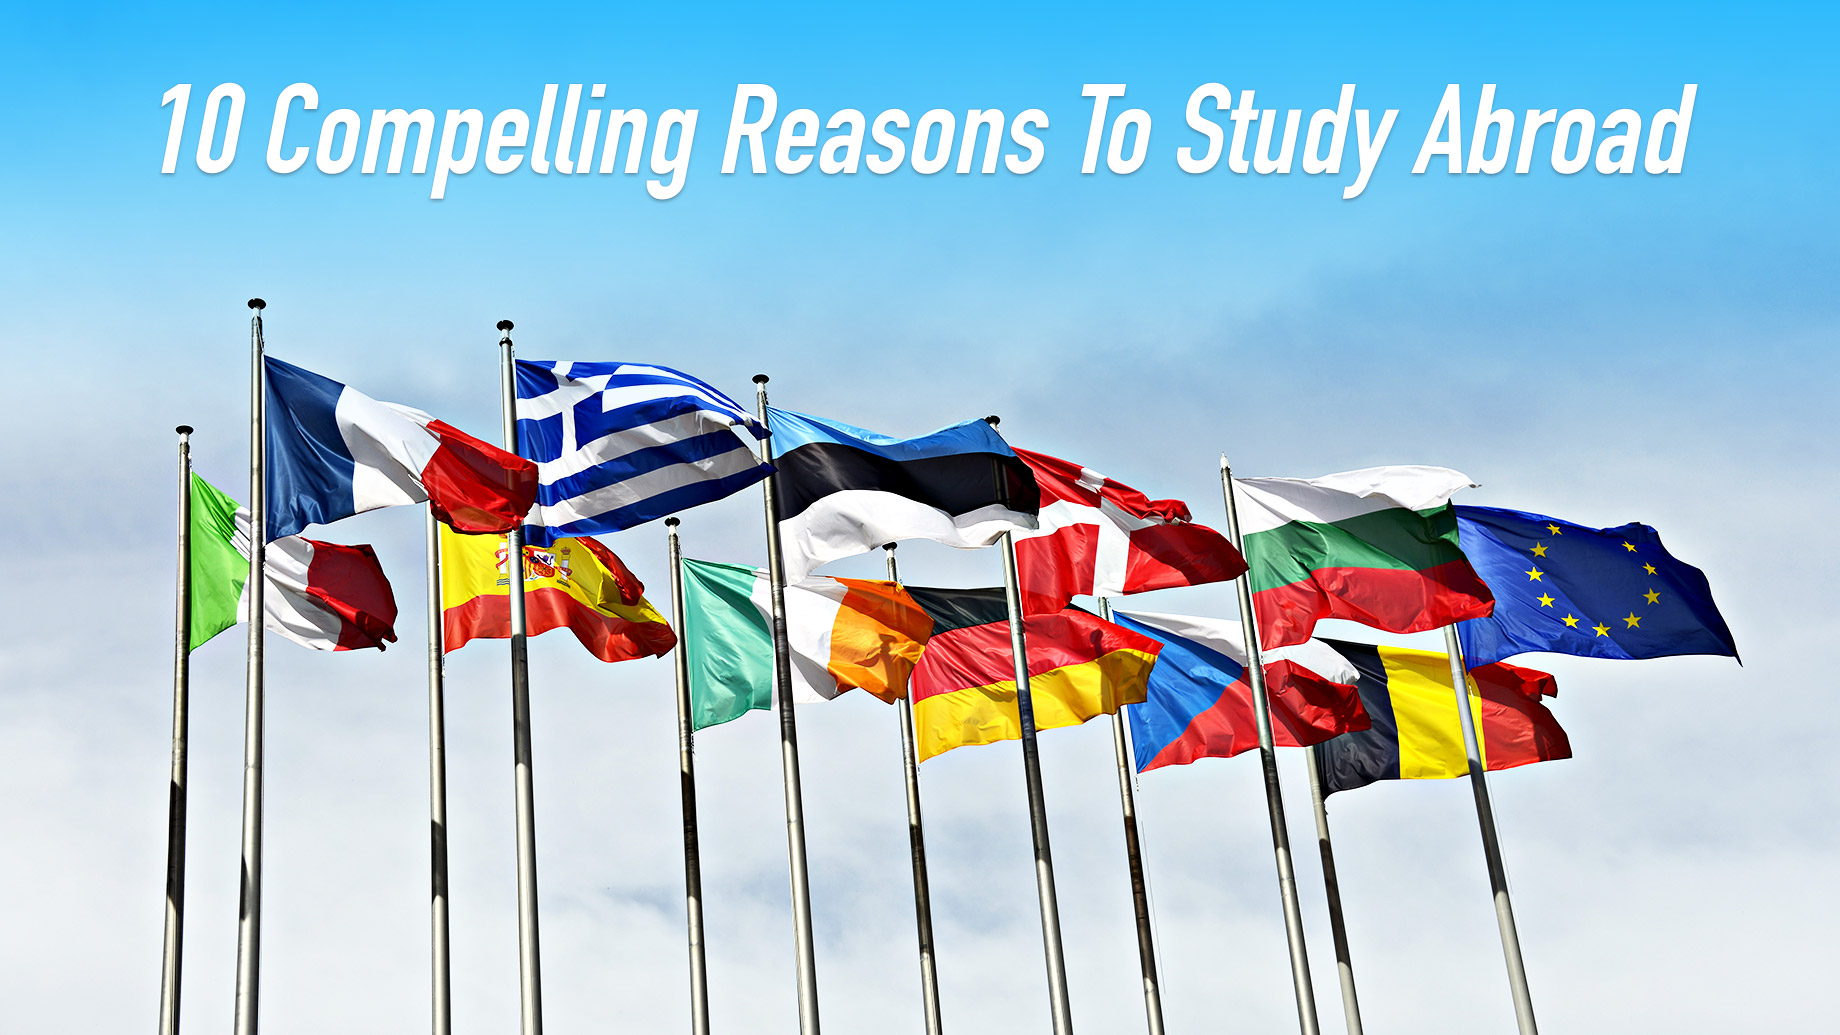 10 Compelling Reasons To Study Abroad